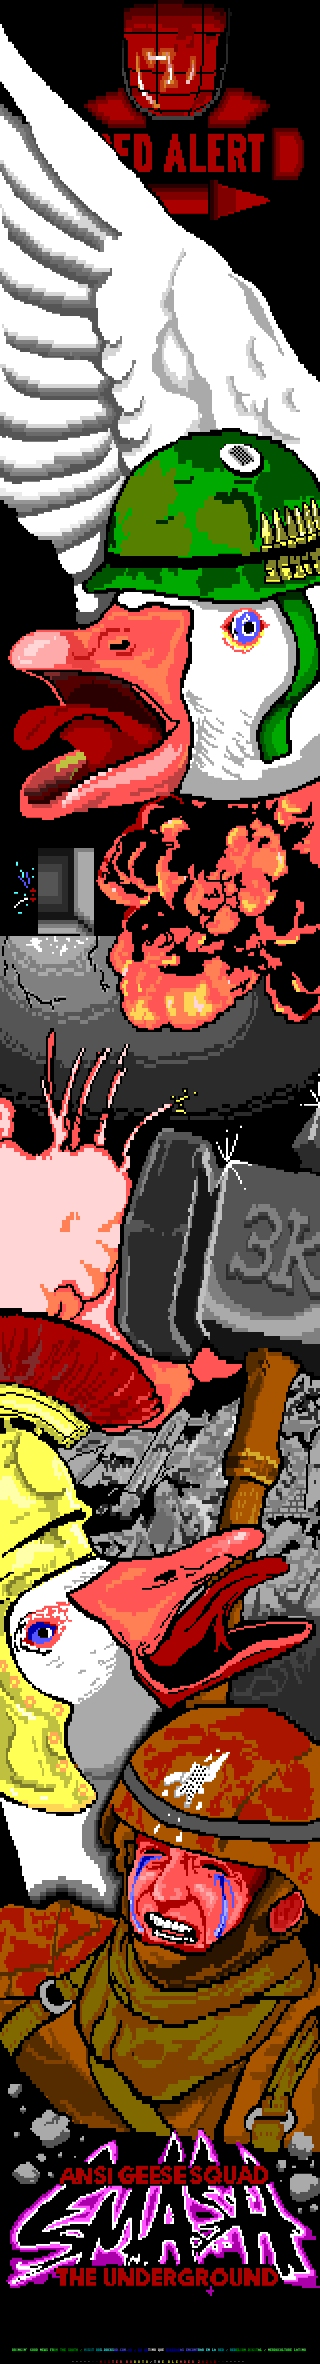 ANSI Geese Squad SMASH the Undergro by Mister Roboto